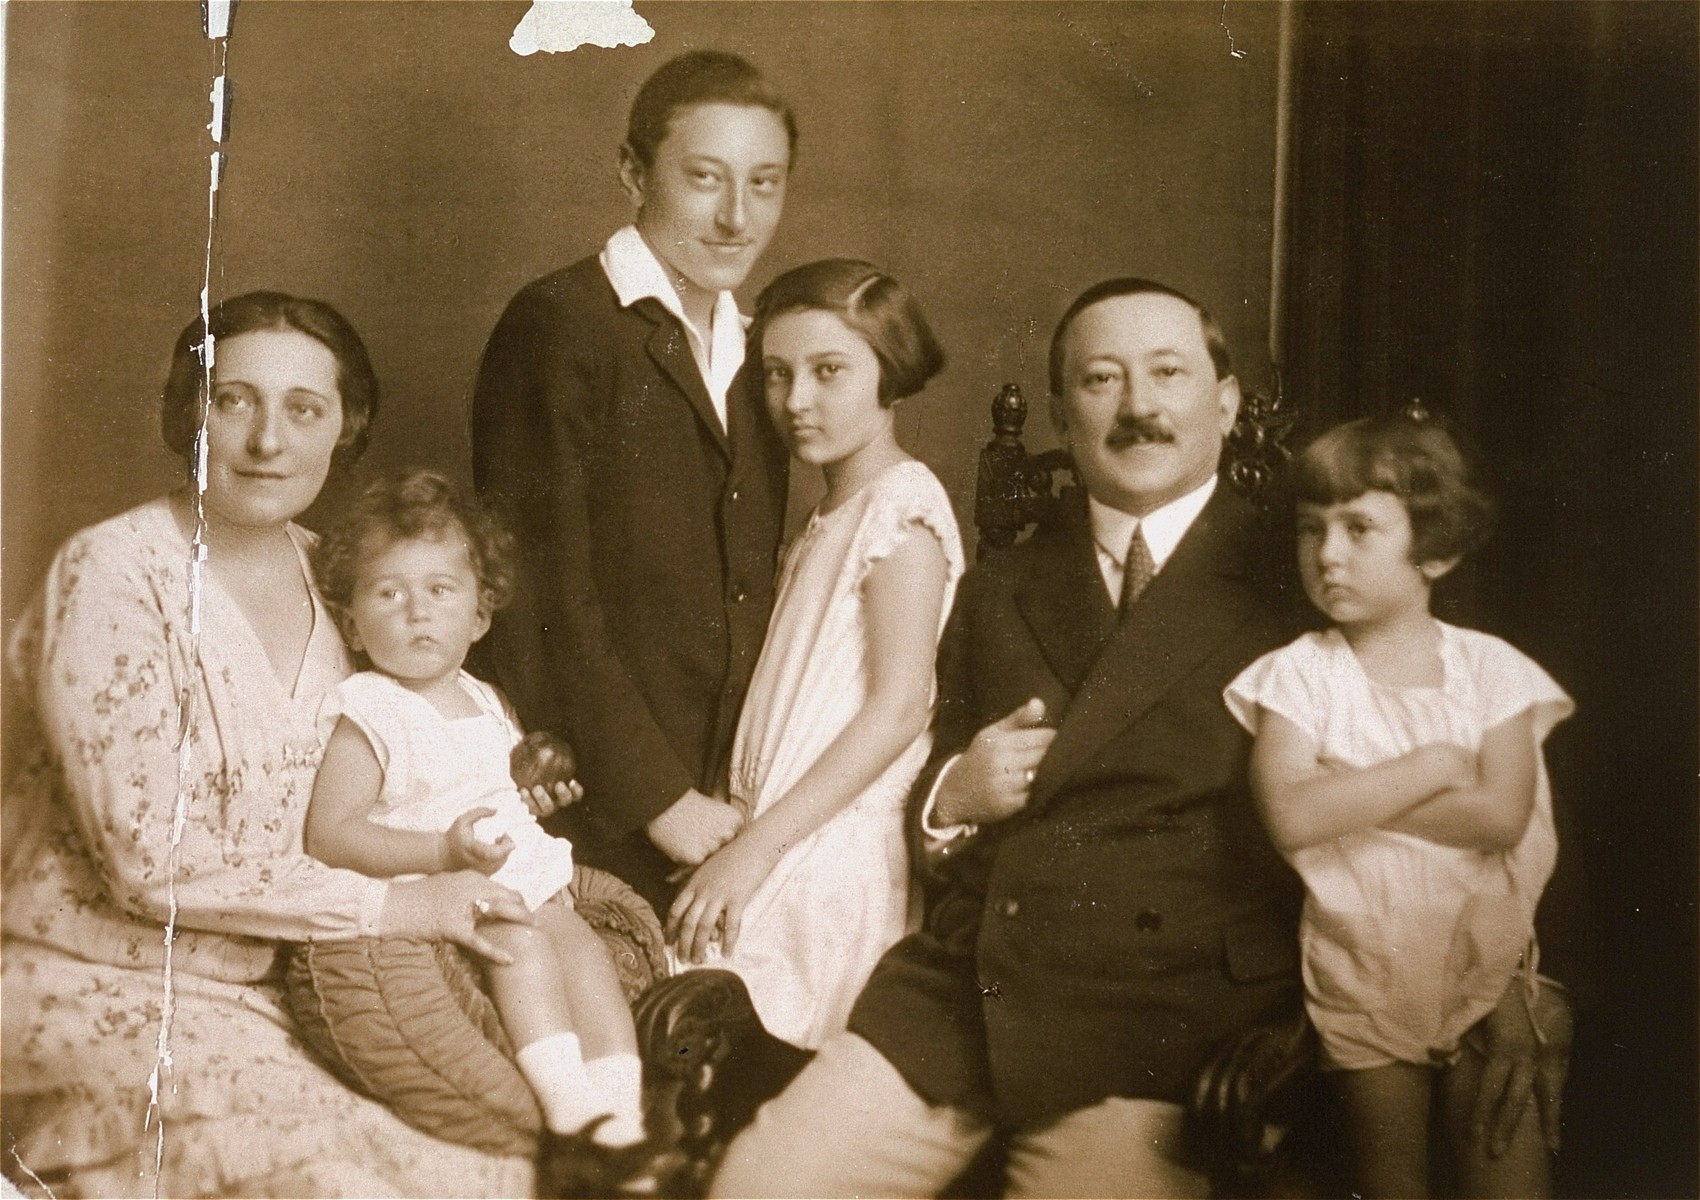 Portrait of the family of Pal Kornhauser in Budapest.  

Pictured from left to right are: Aranka (Shatz) Kornhauser, Janos Kornhauser (the child on her lap), Endre Kornhauser, Lilly Kornhauser, Pal Kornhauser and Tamas Kornhauser.